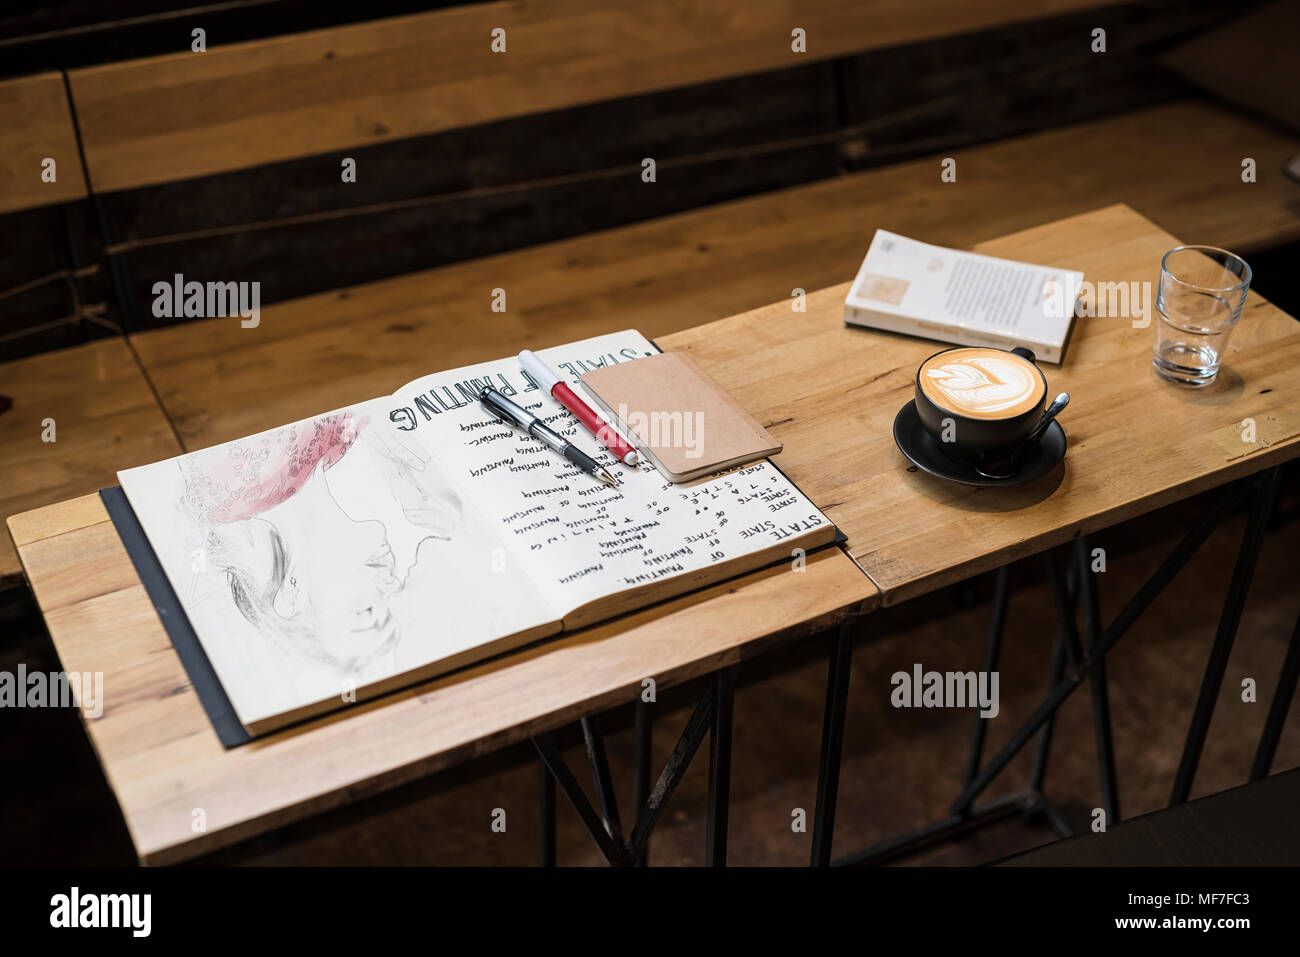 Table in a cafe with coffee mug, notebooks, pens and a glass of water Stock Photo